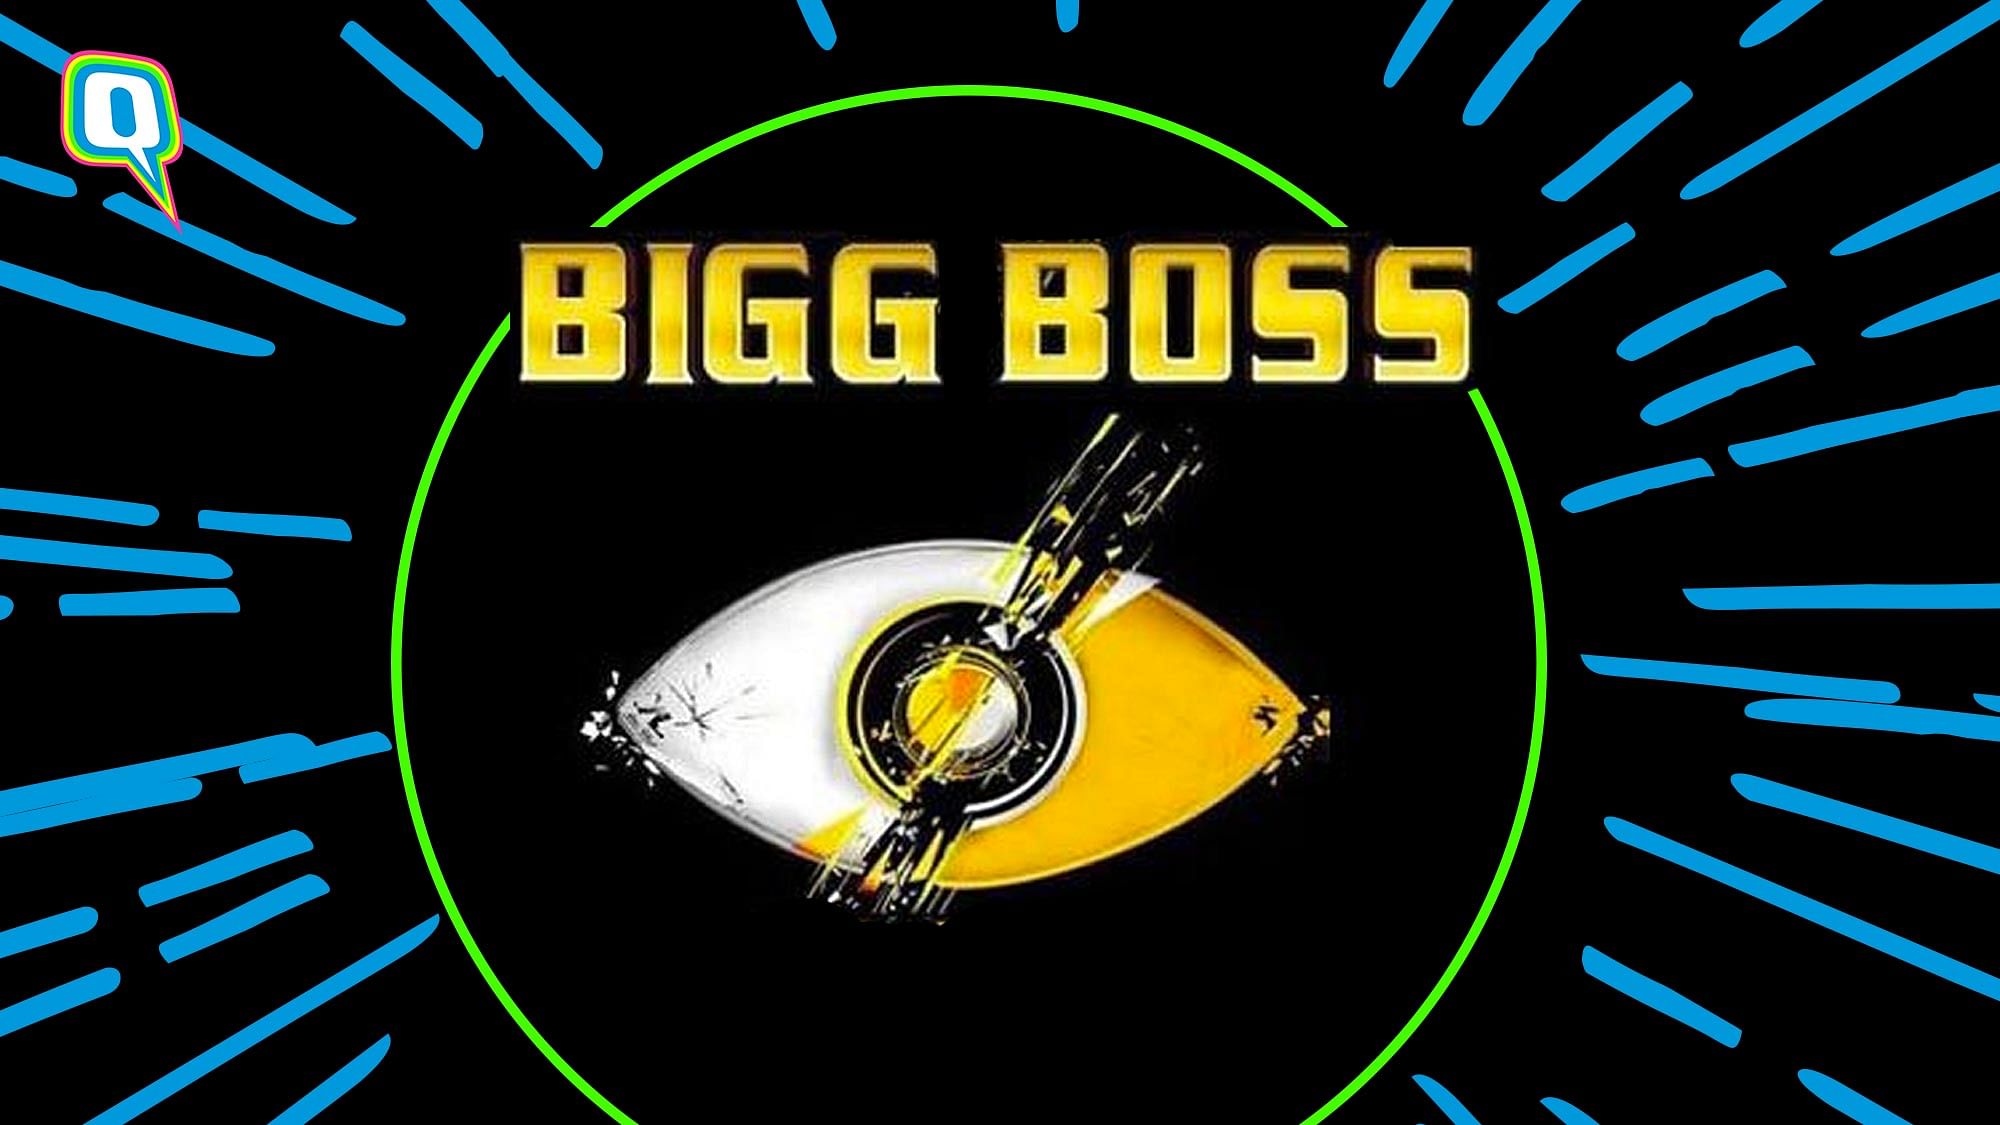 Bigg Boss could be like real life if you were in a boot camp where you were being prepared to be in the show.